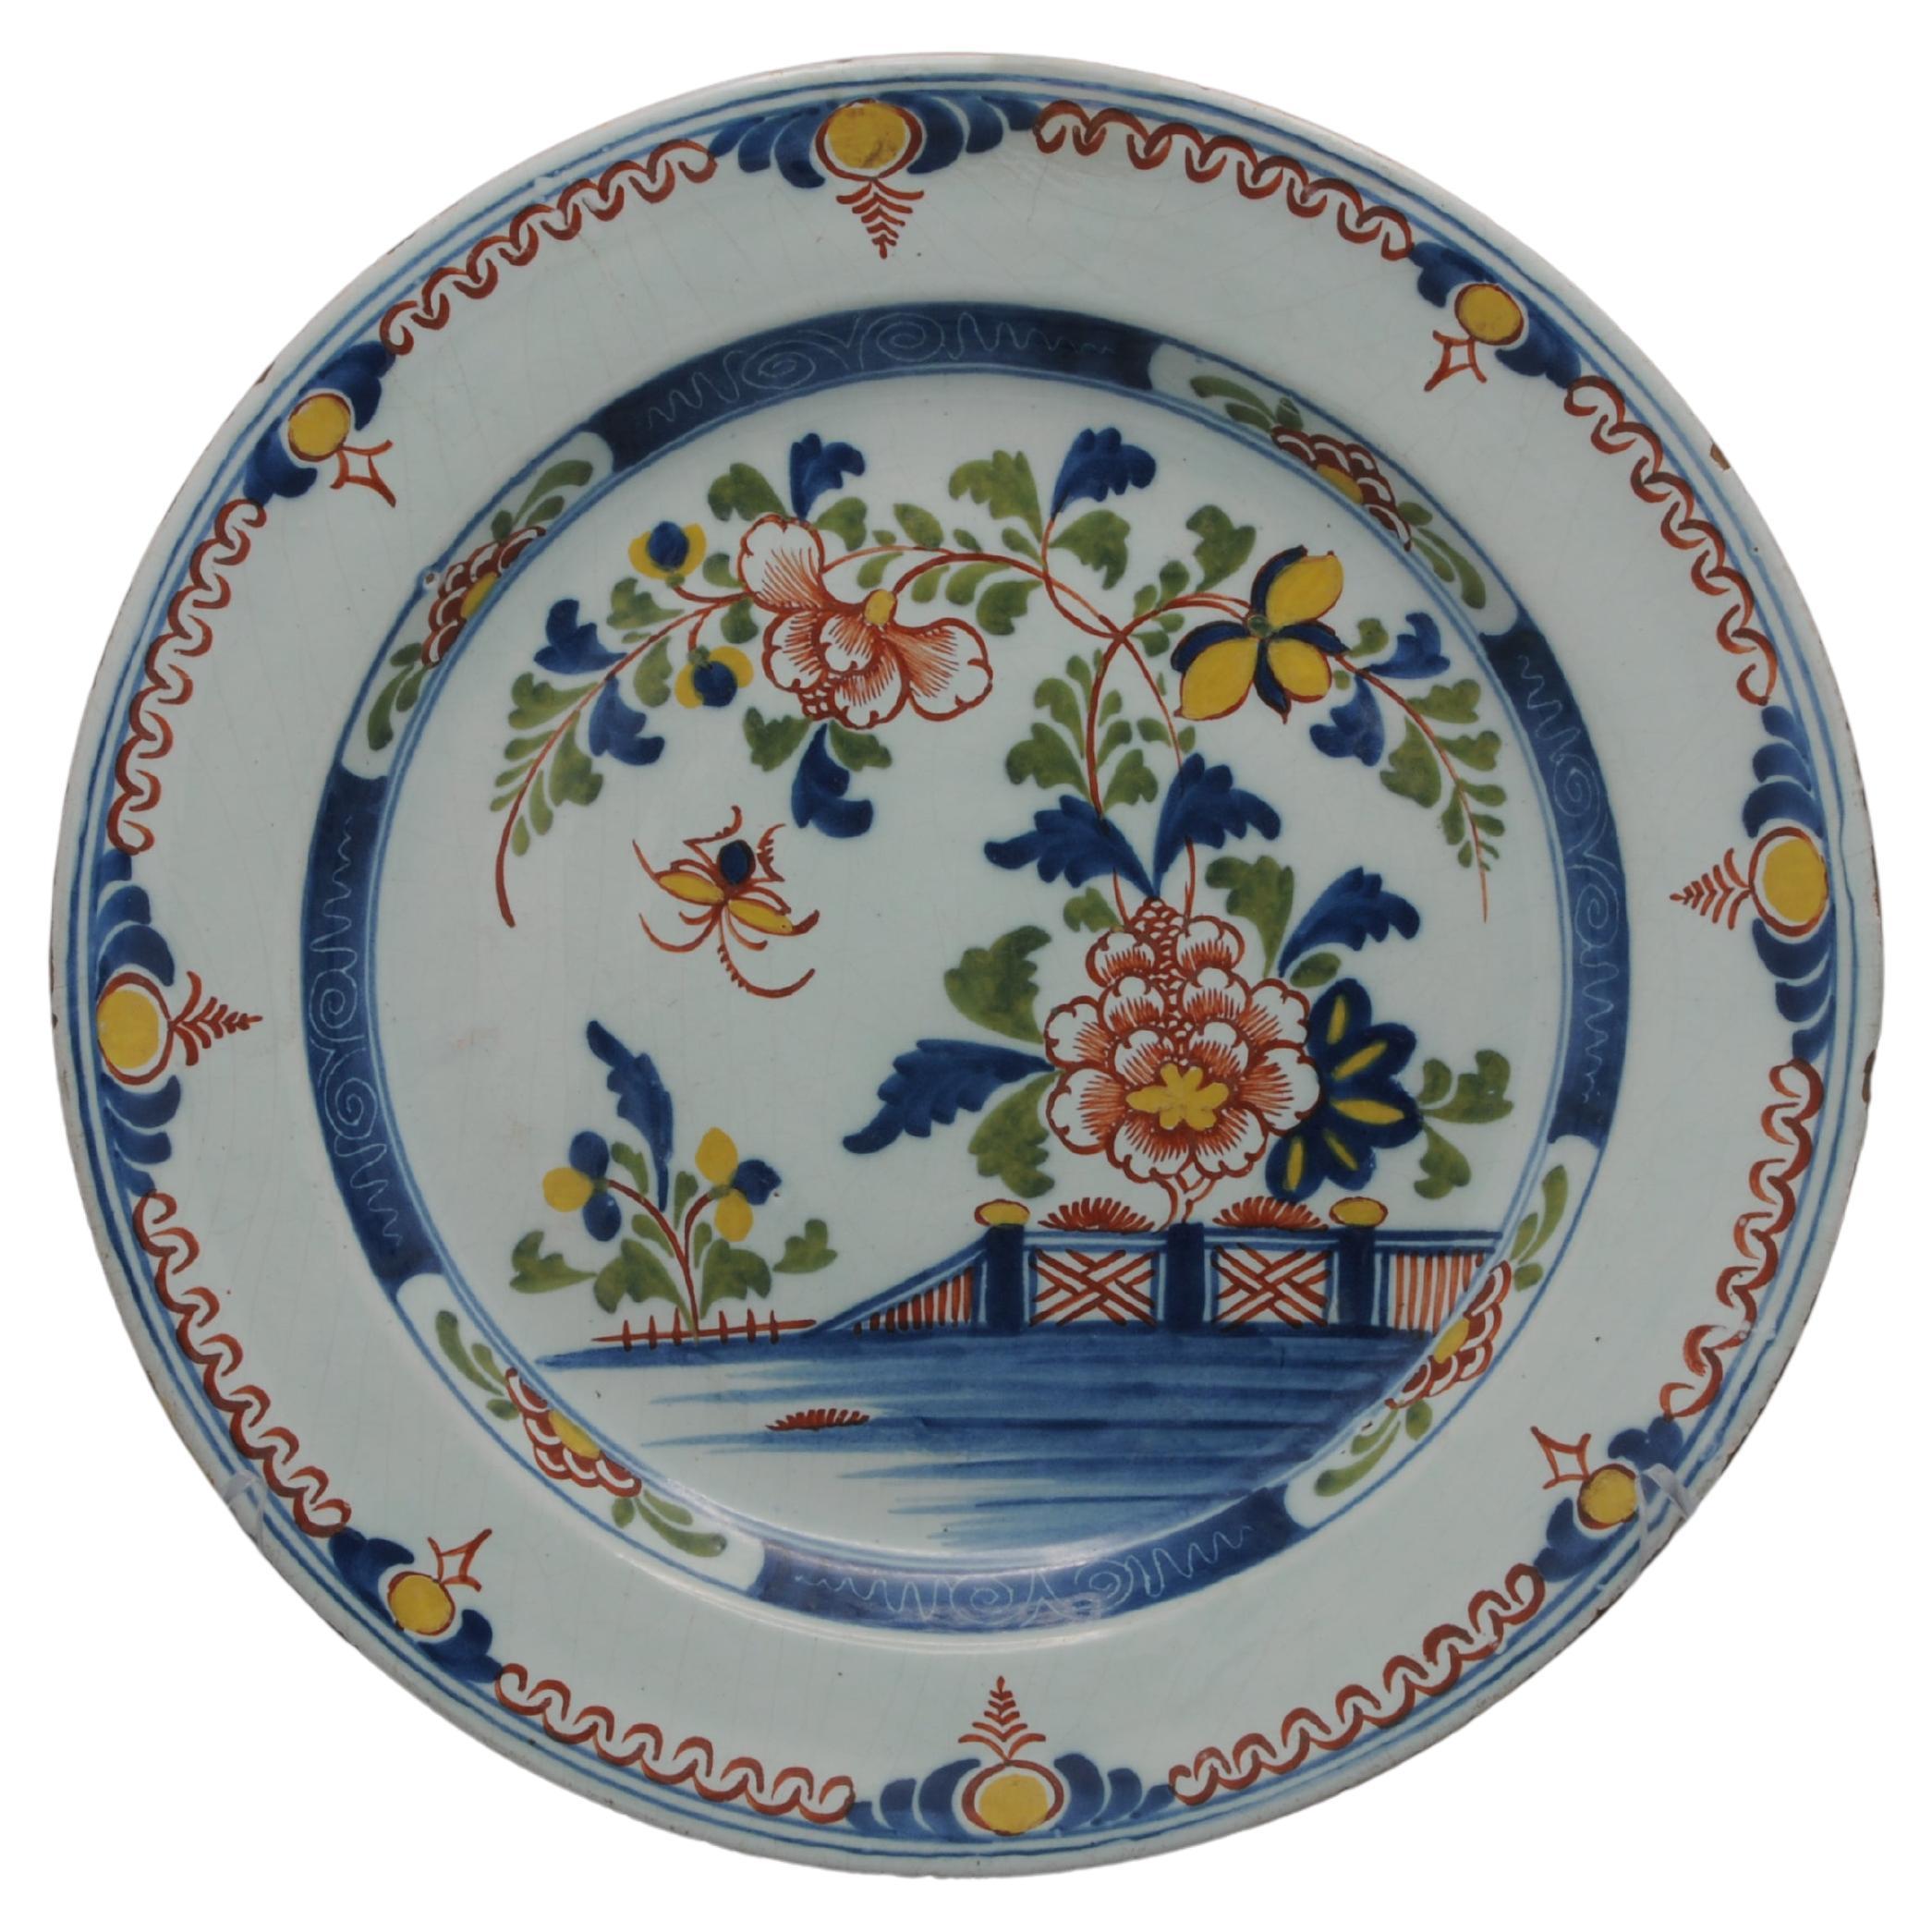 Delft - Polychrome Chinoiserie Charger